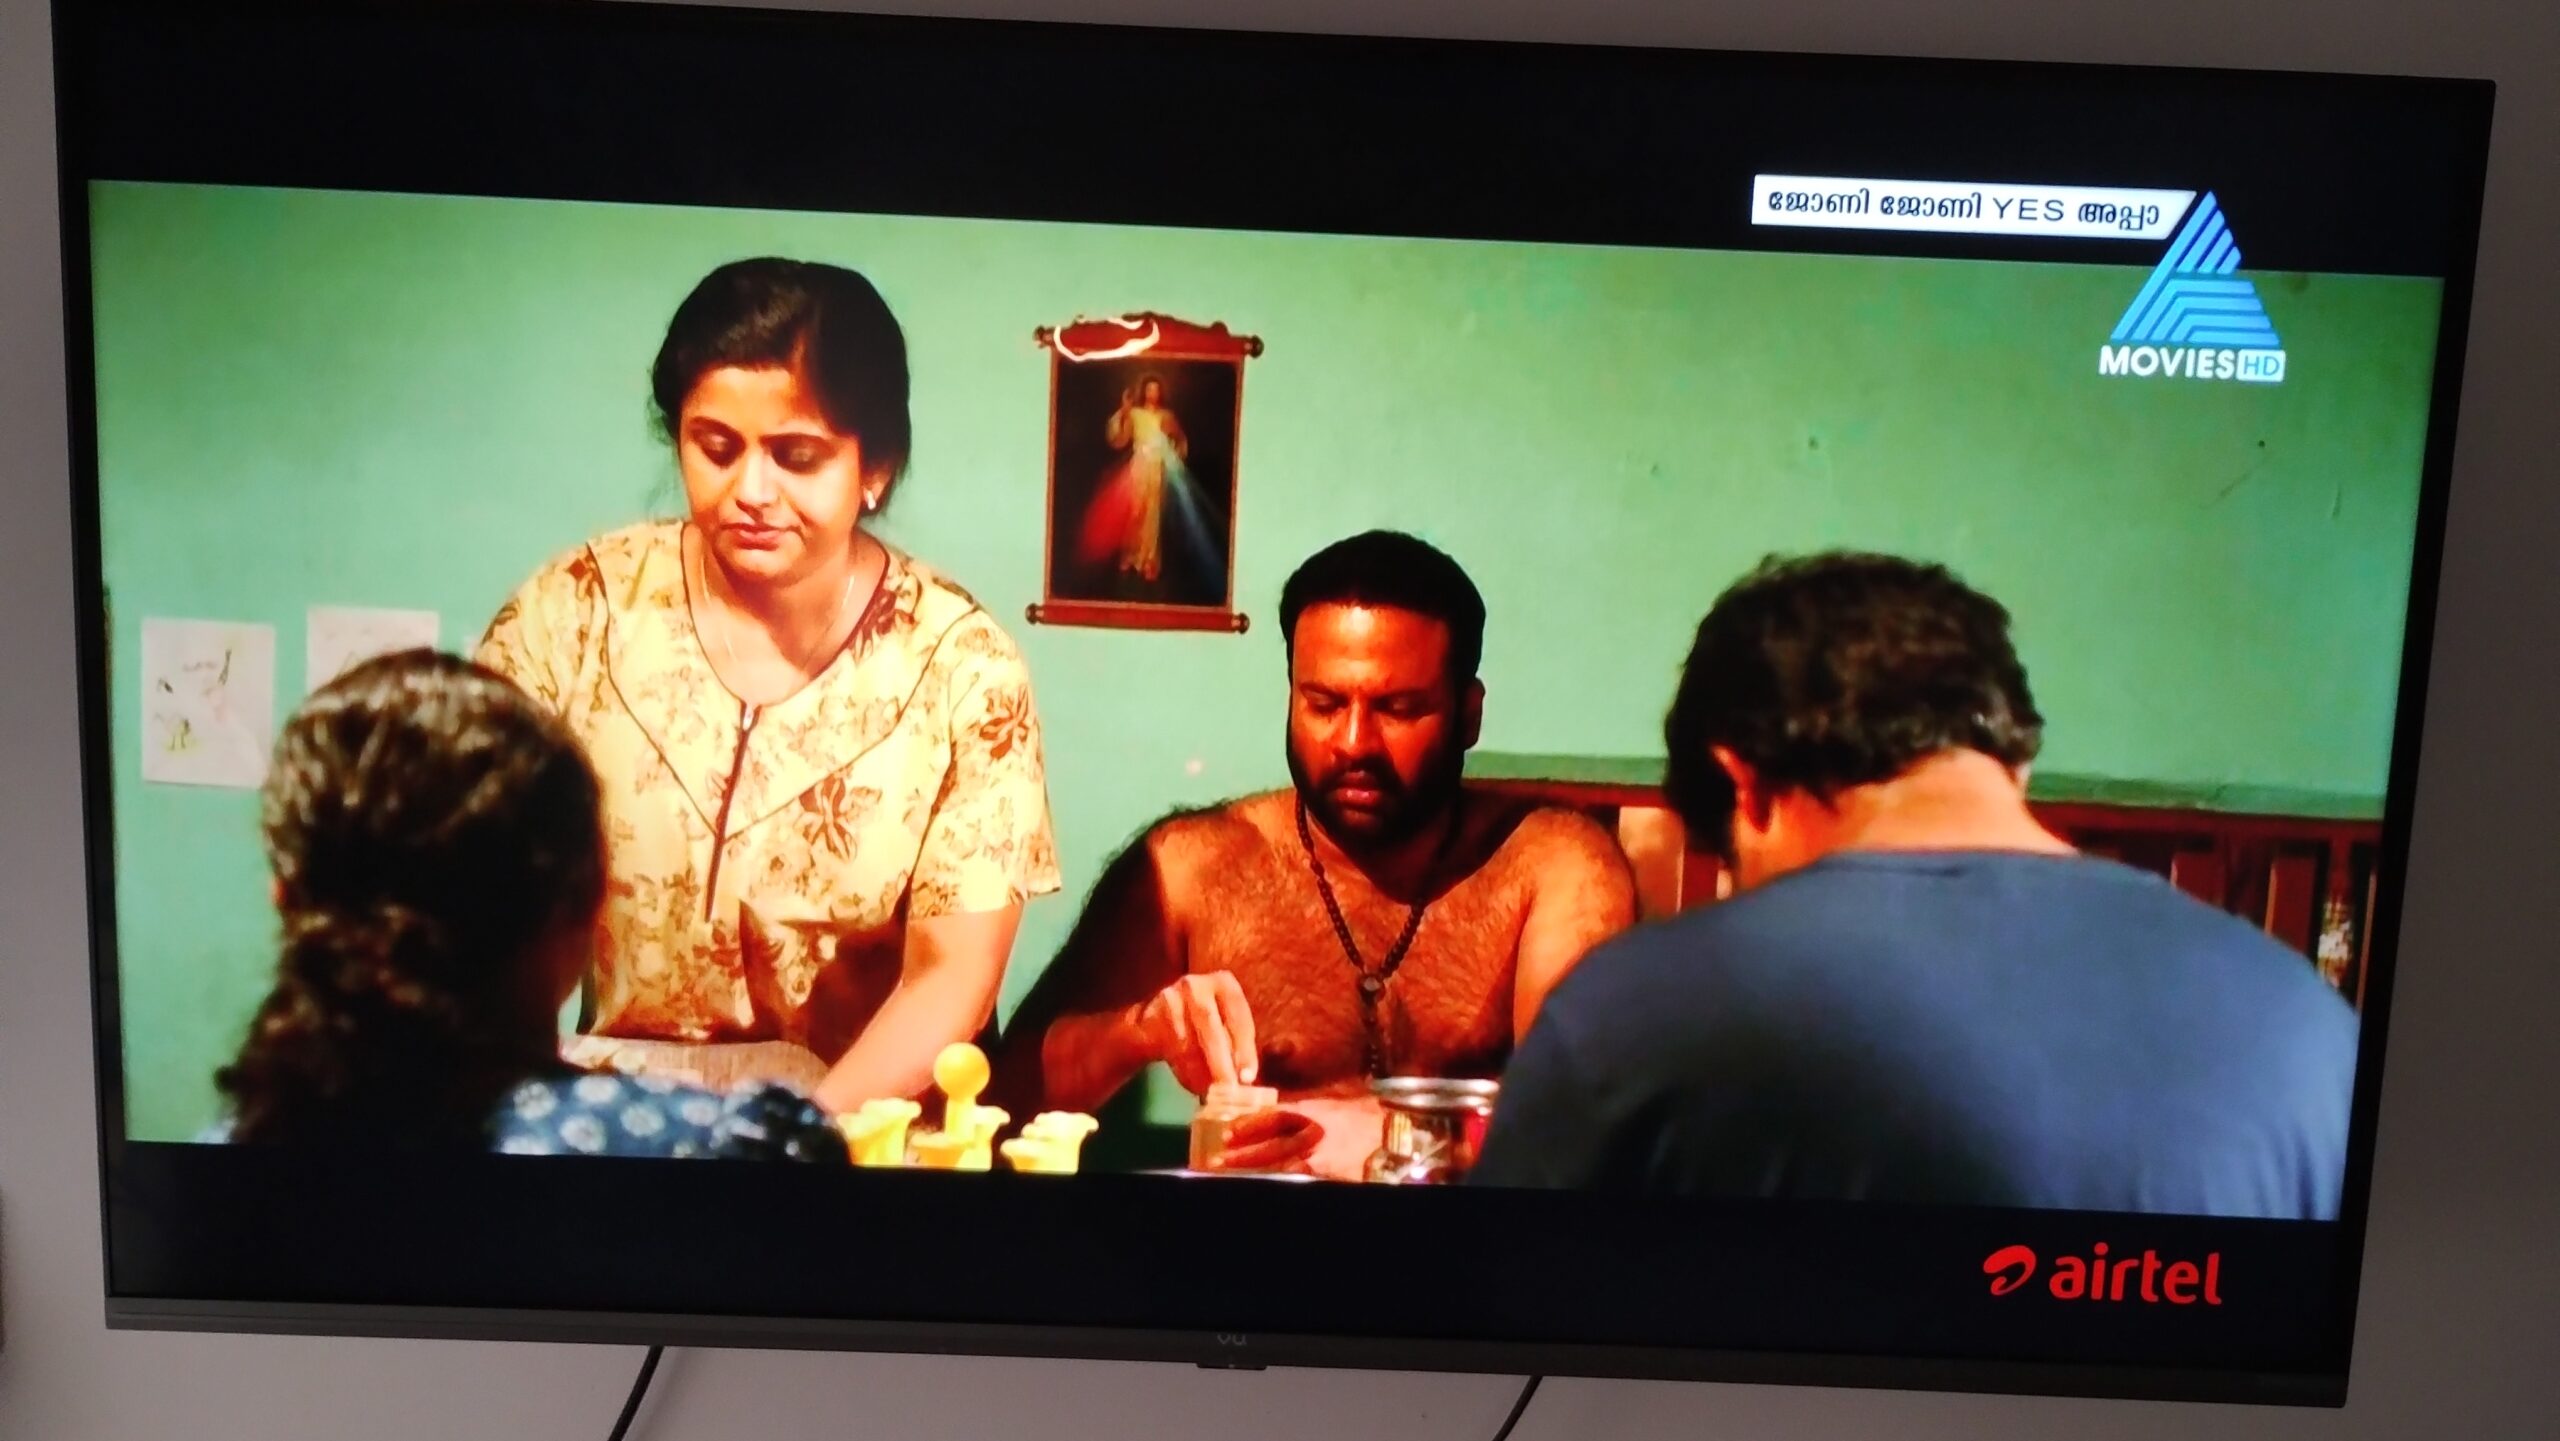 Asianet Movies HD on Airtel LCN 841 scaled